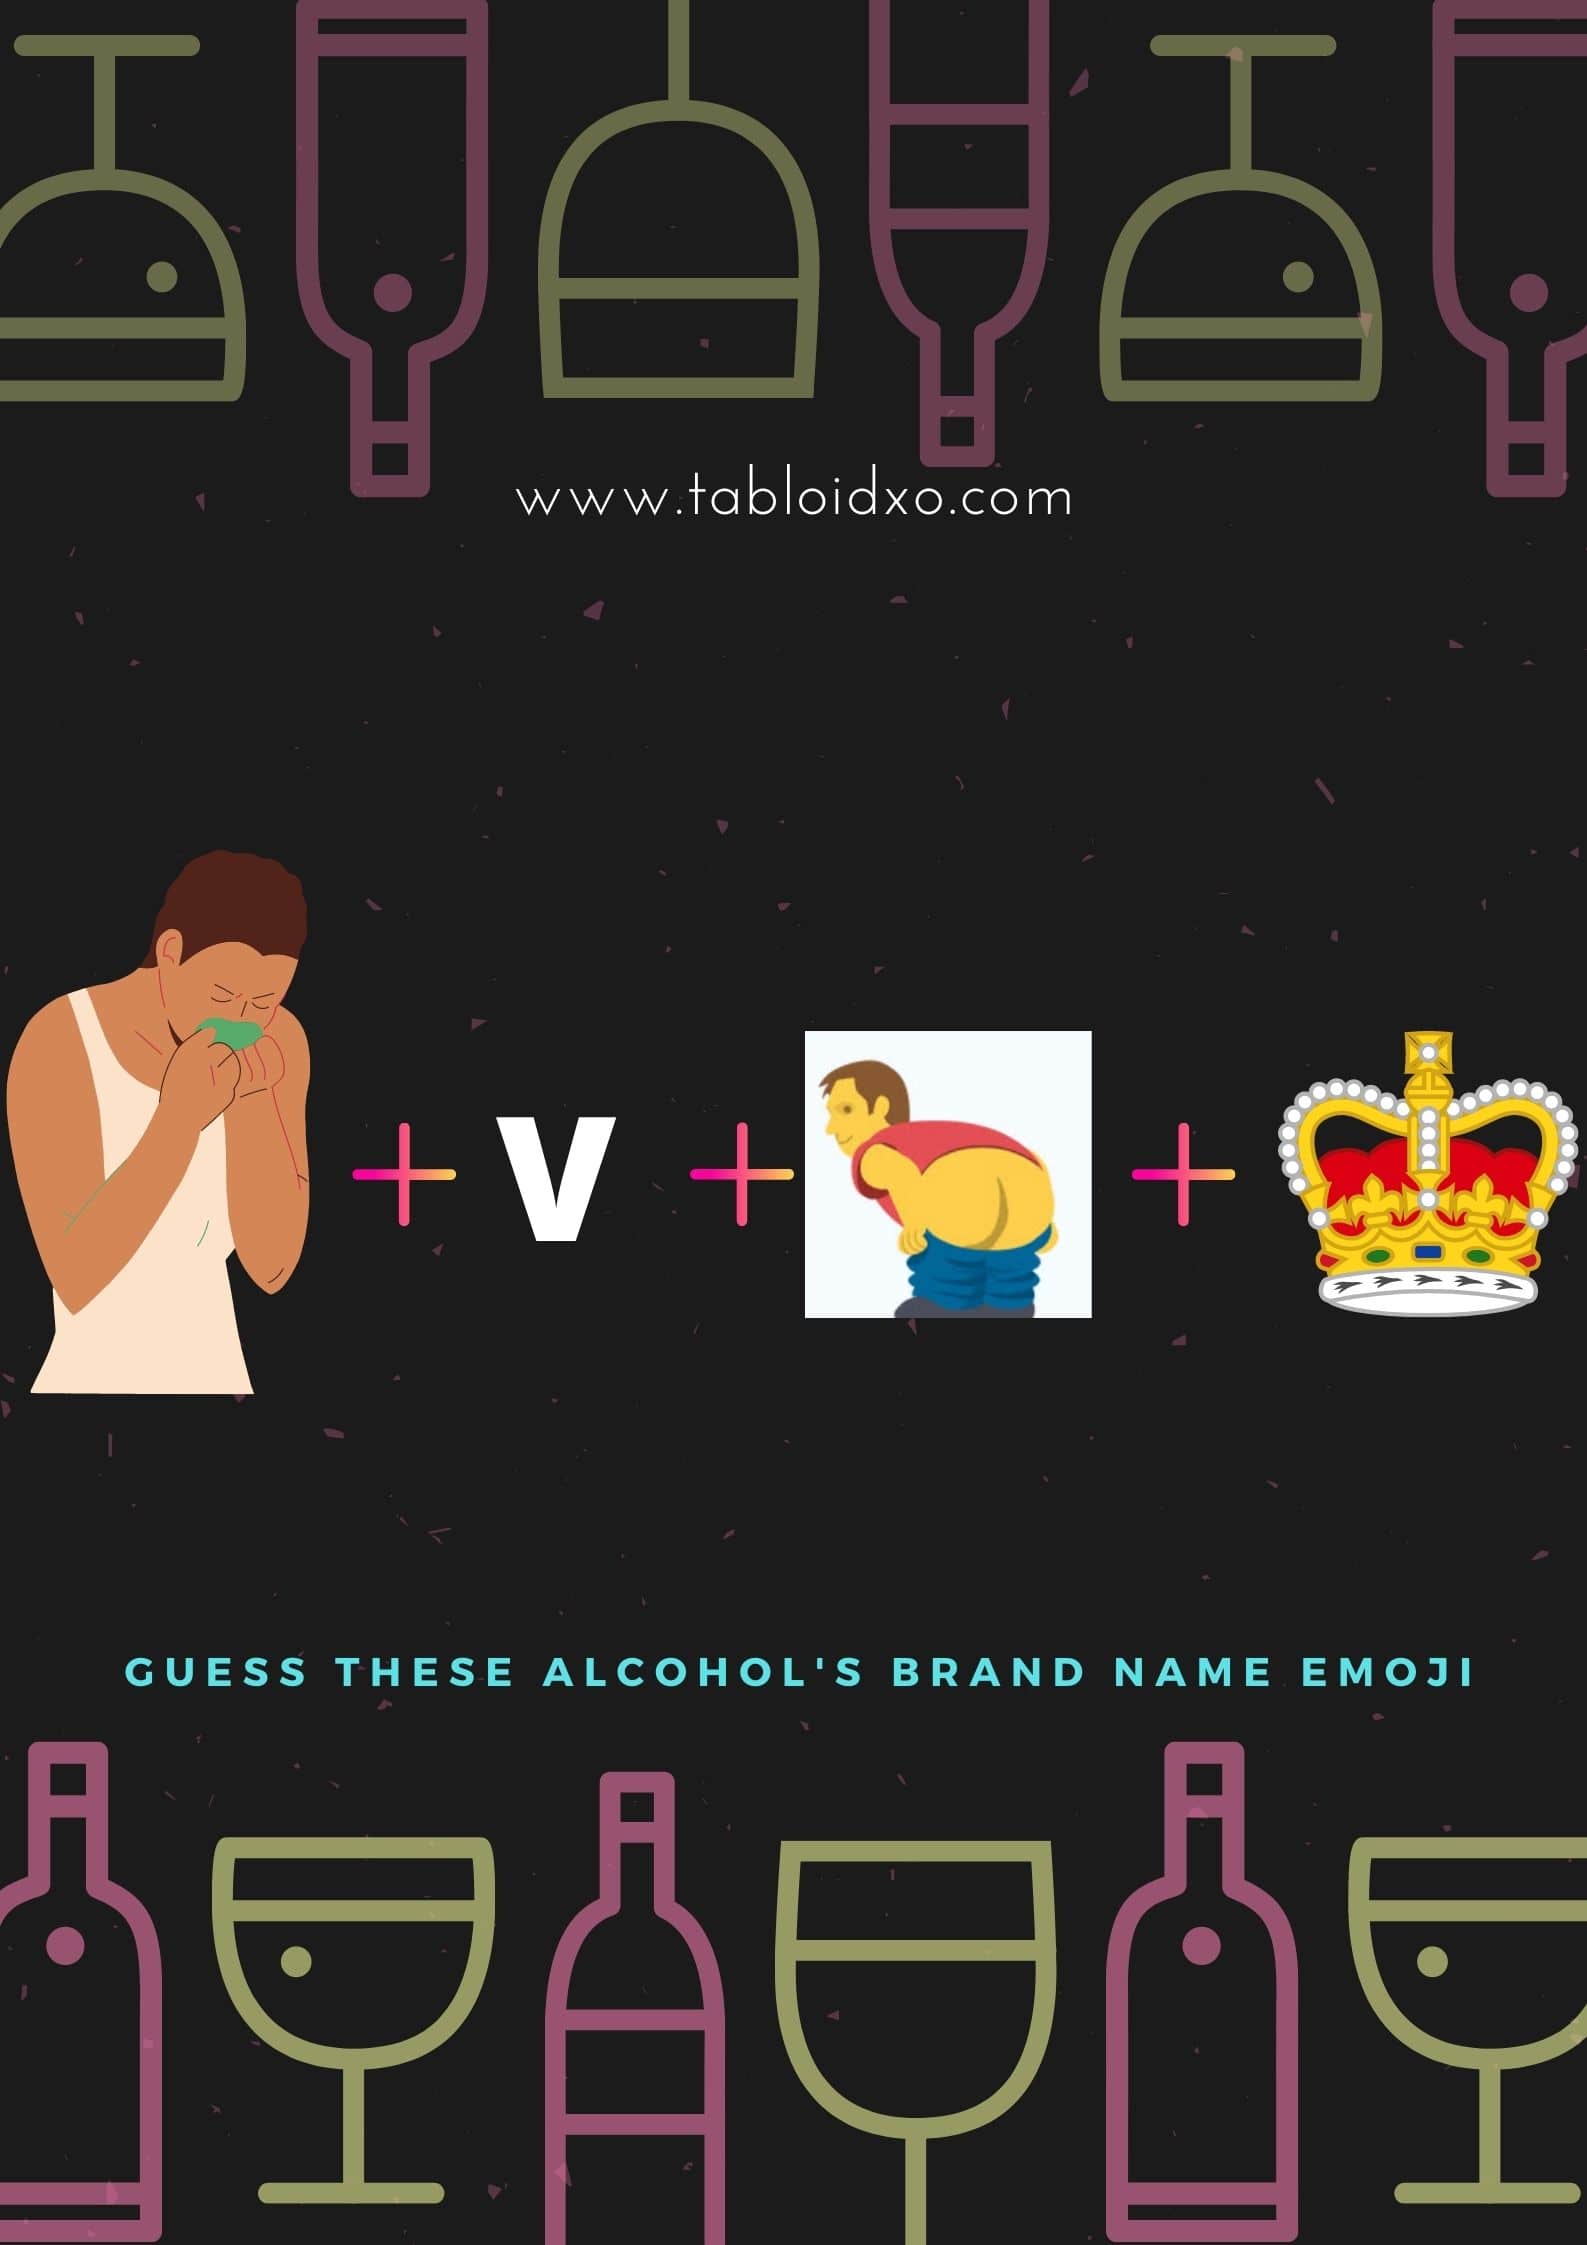 guess the song by emoji bollywood with answers